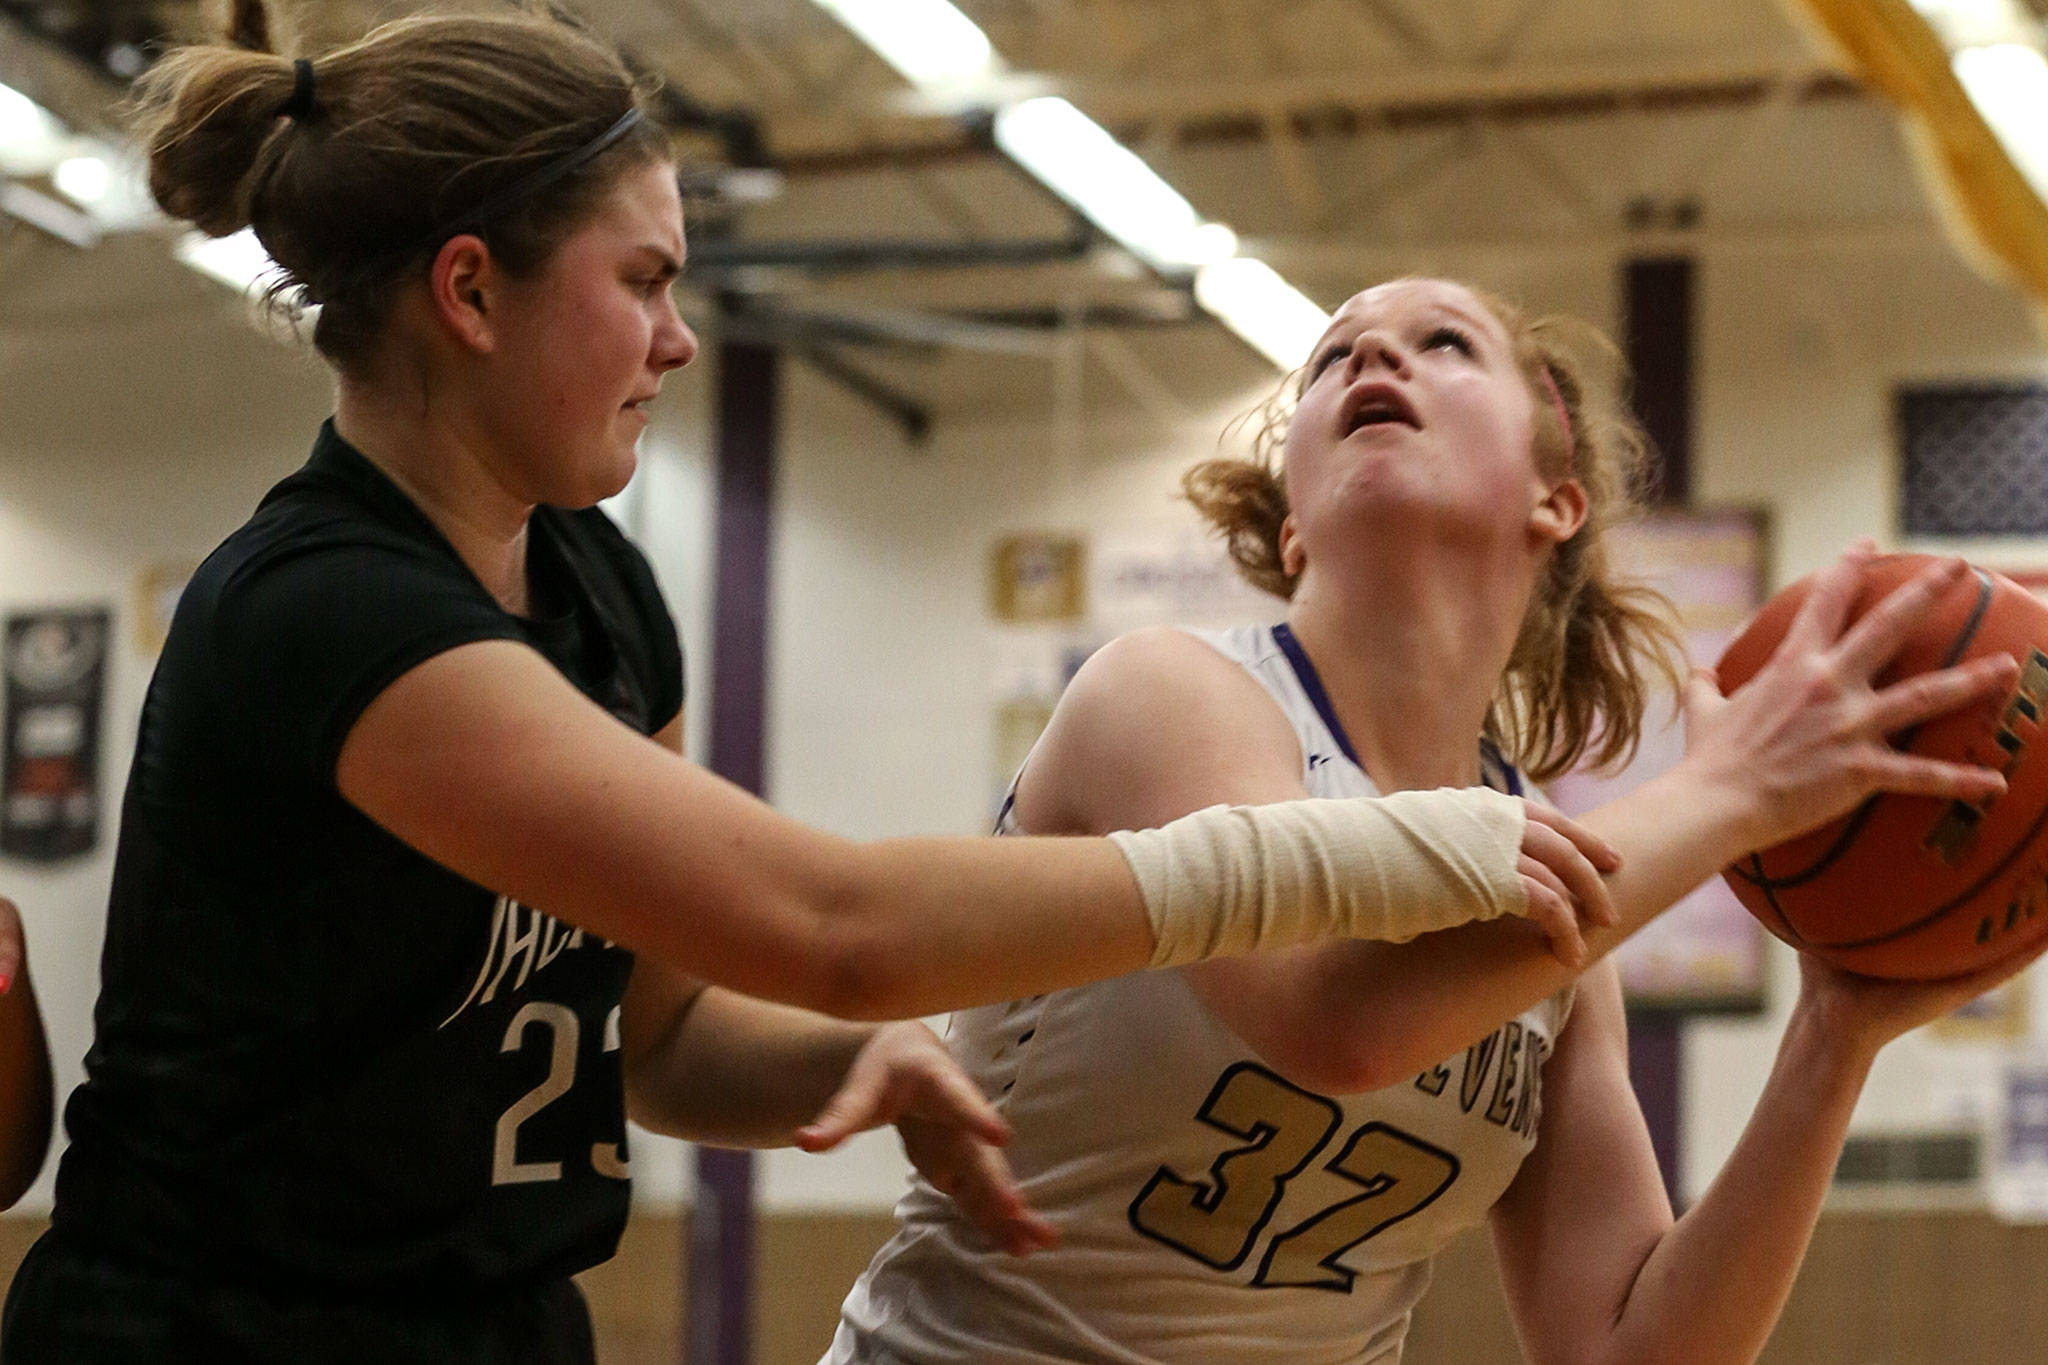 Lake Stevens’ Cori Wilcox (right) looks to score with Jackson’s Olivia Skibiel defending during the Vikings’ 62-39 win Tuesday night at Lake Stevens High School. (Kevin Clark / The Herald)